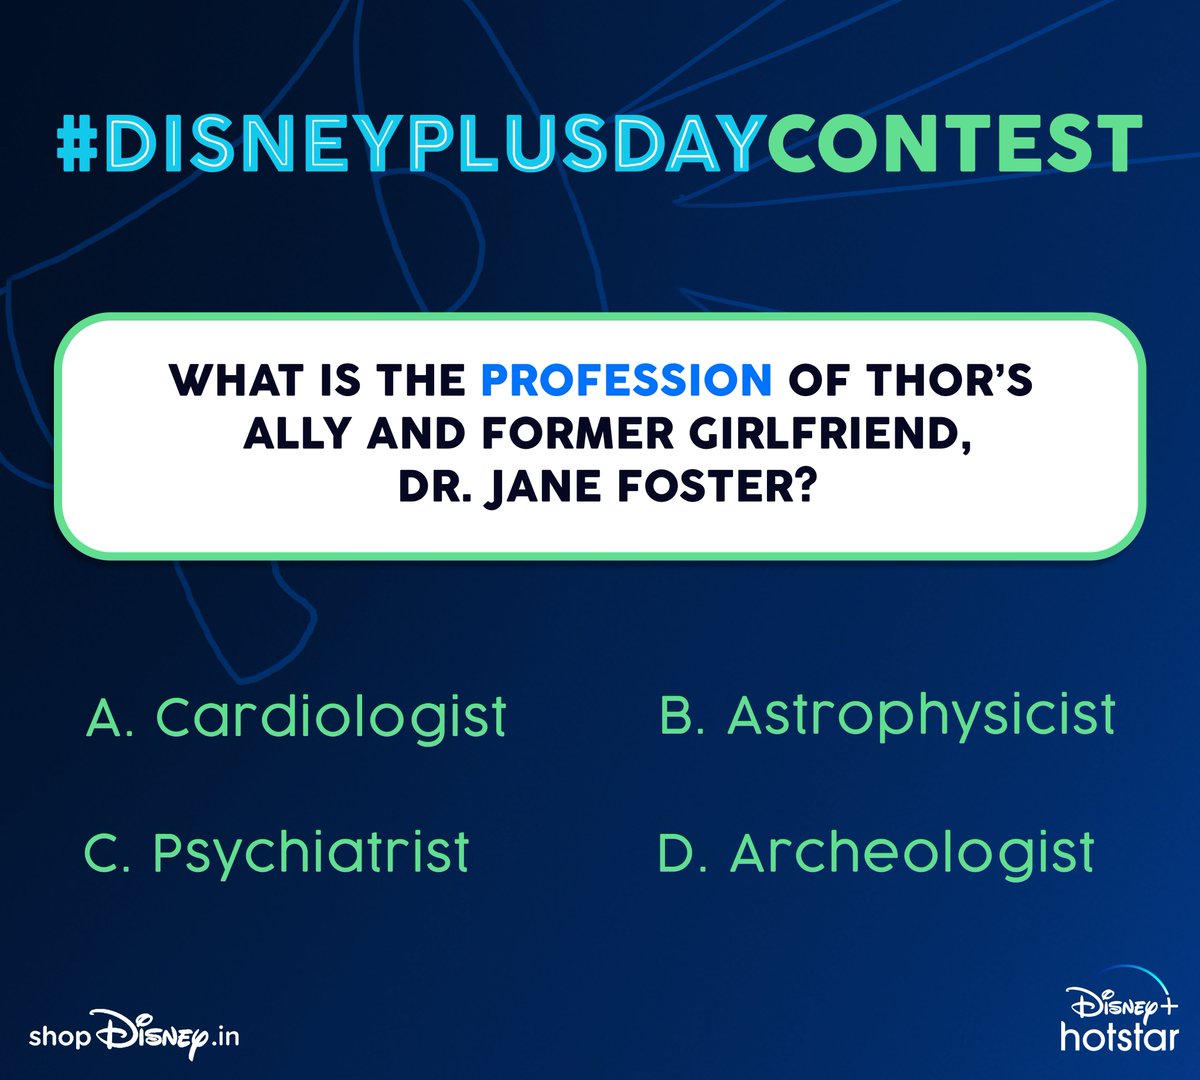 RT @DisneyPlusHS: If Thor is beauty, she is beauty with brains.
#DisneyPlusDayContest
Note: T&C in bio https://t.co/AqF2HvGoaQ